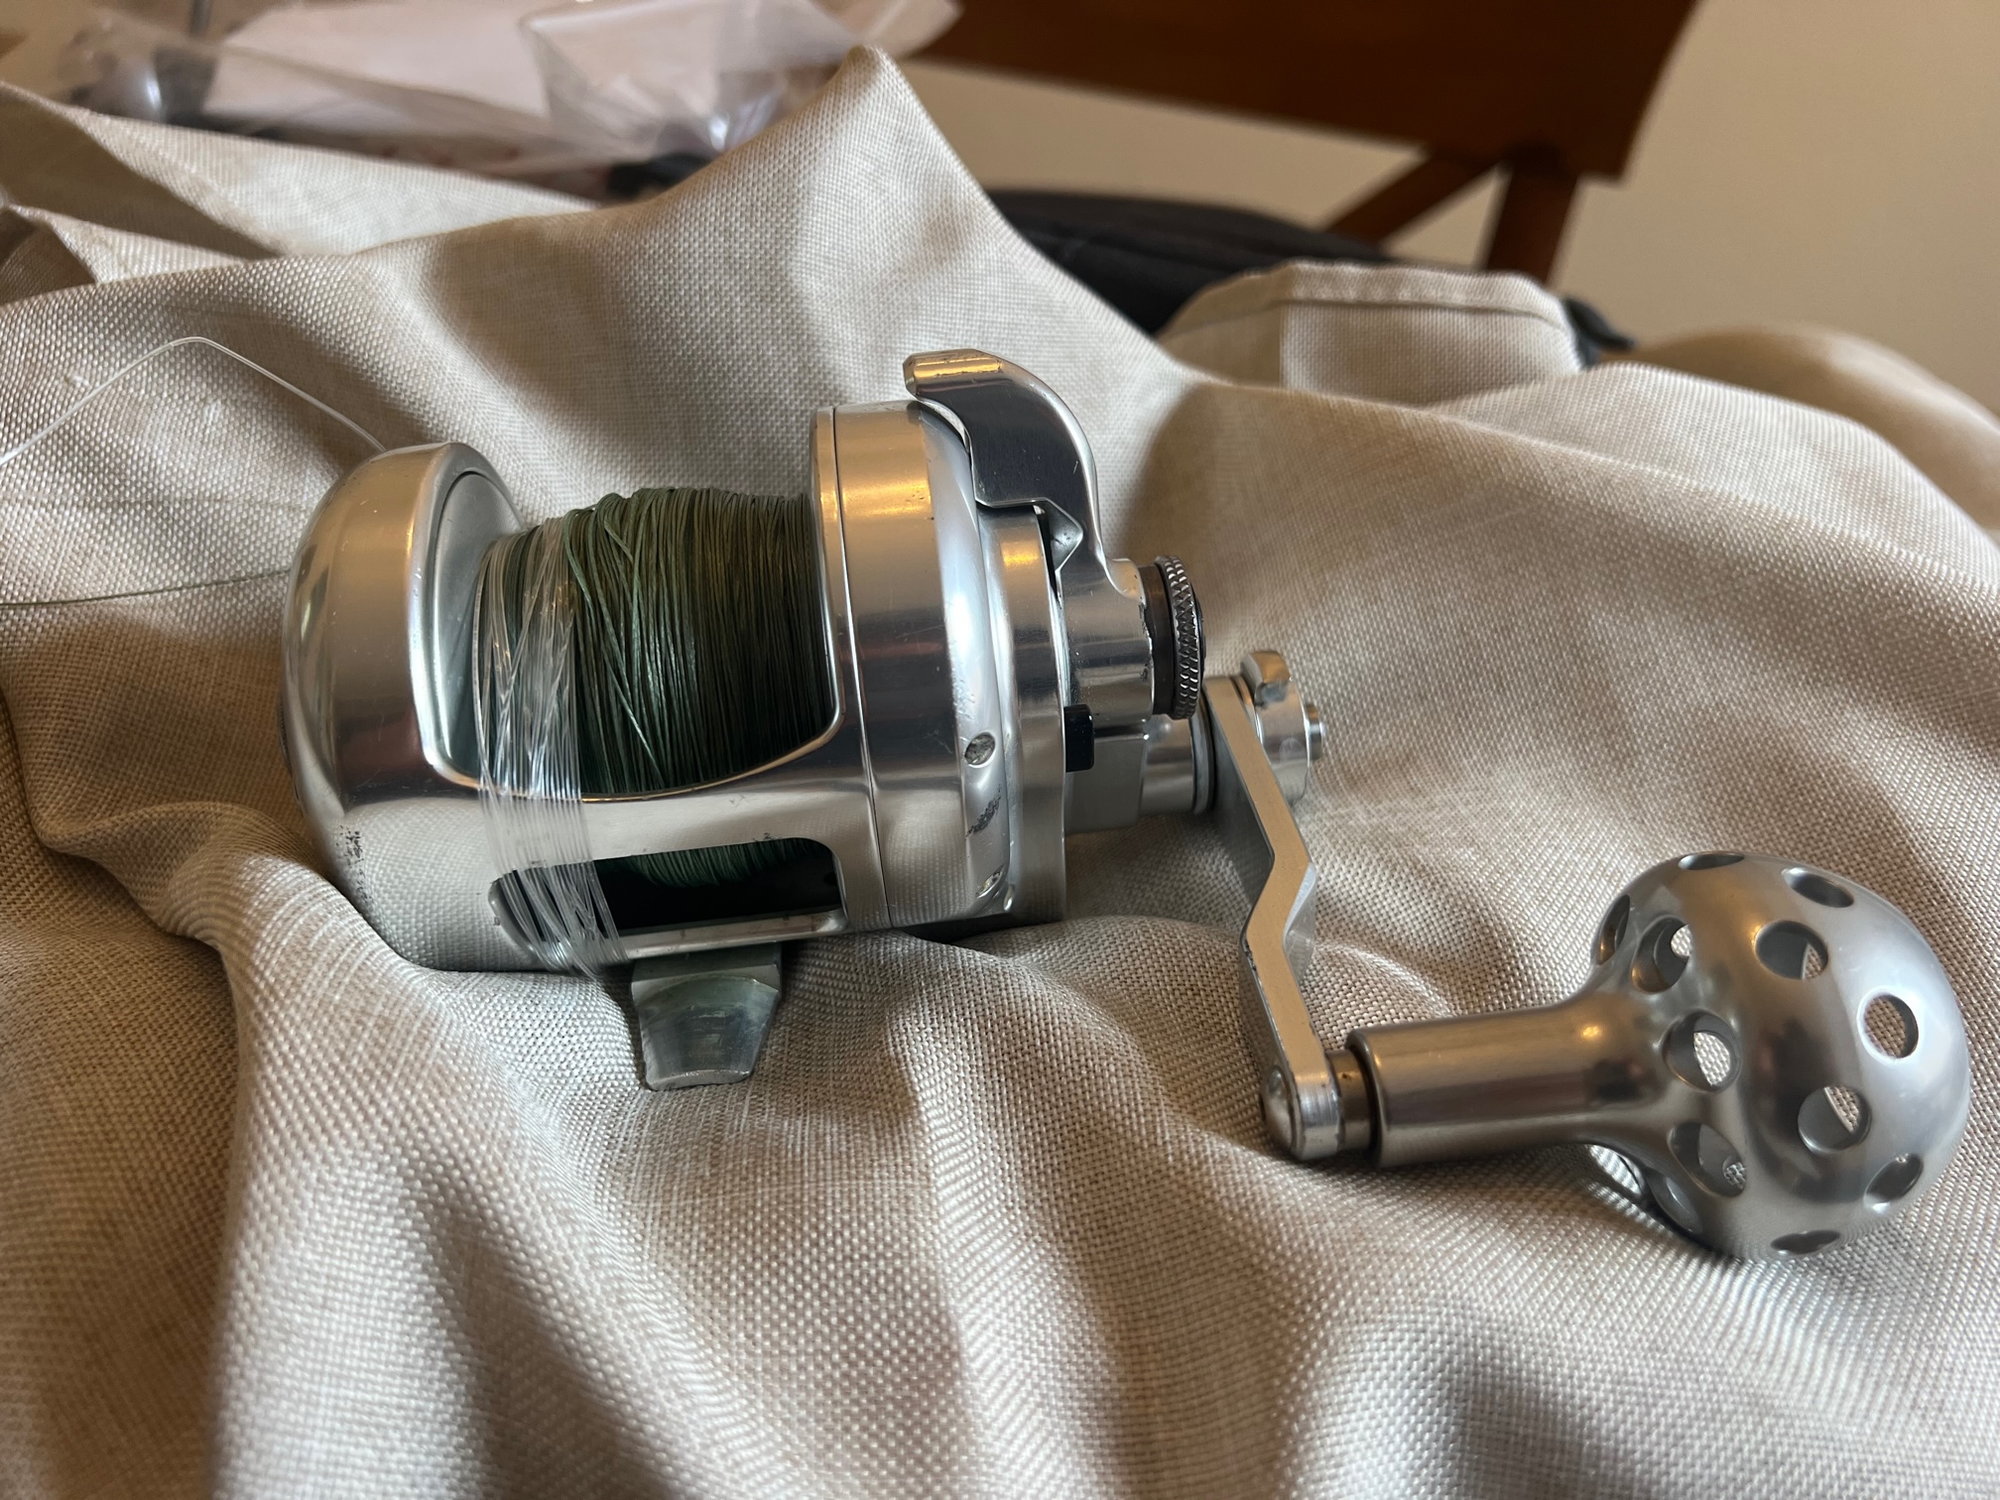 Accurate Boss Magnum 870 For Sale - The Hull Truth - Boating and Fishing  Forum